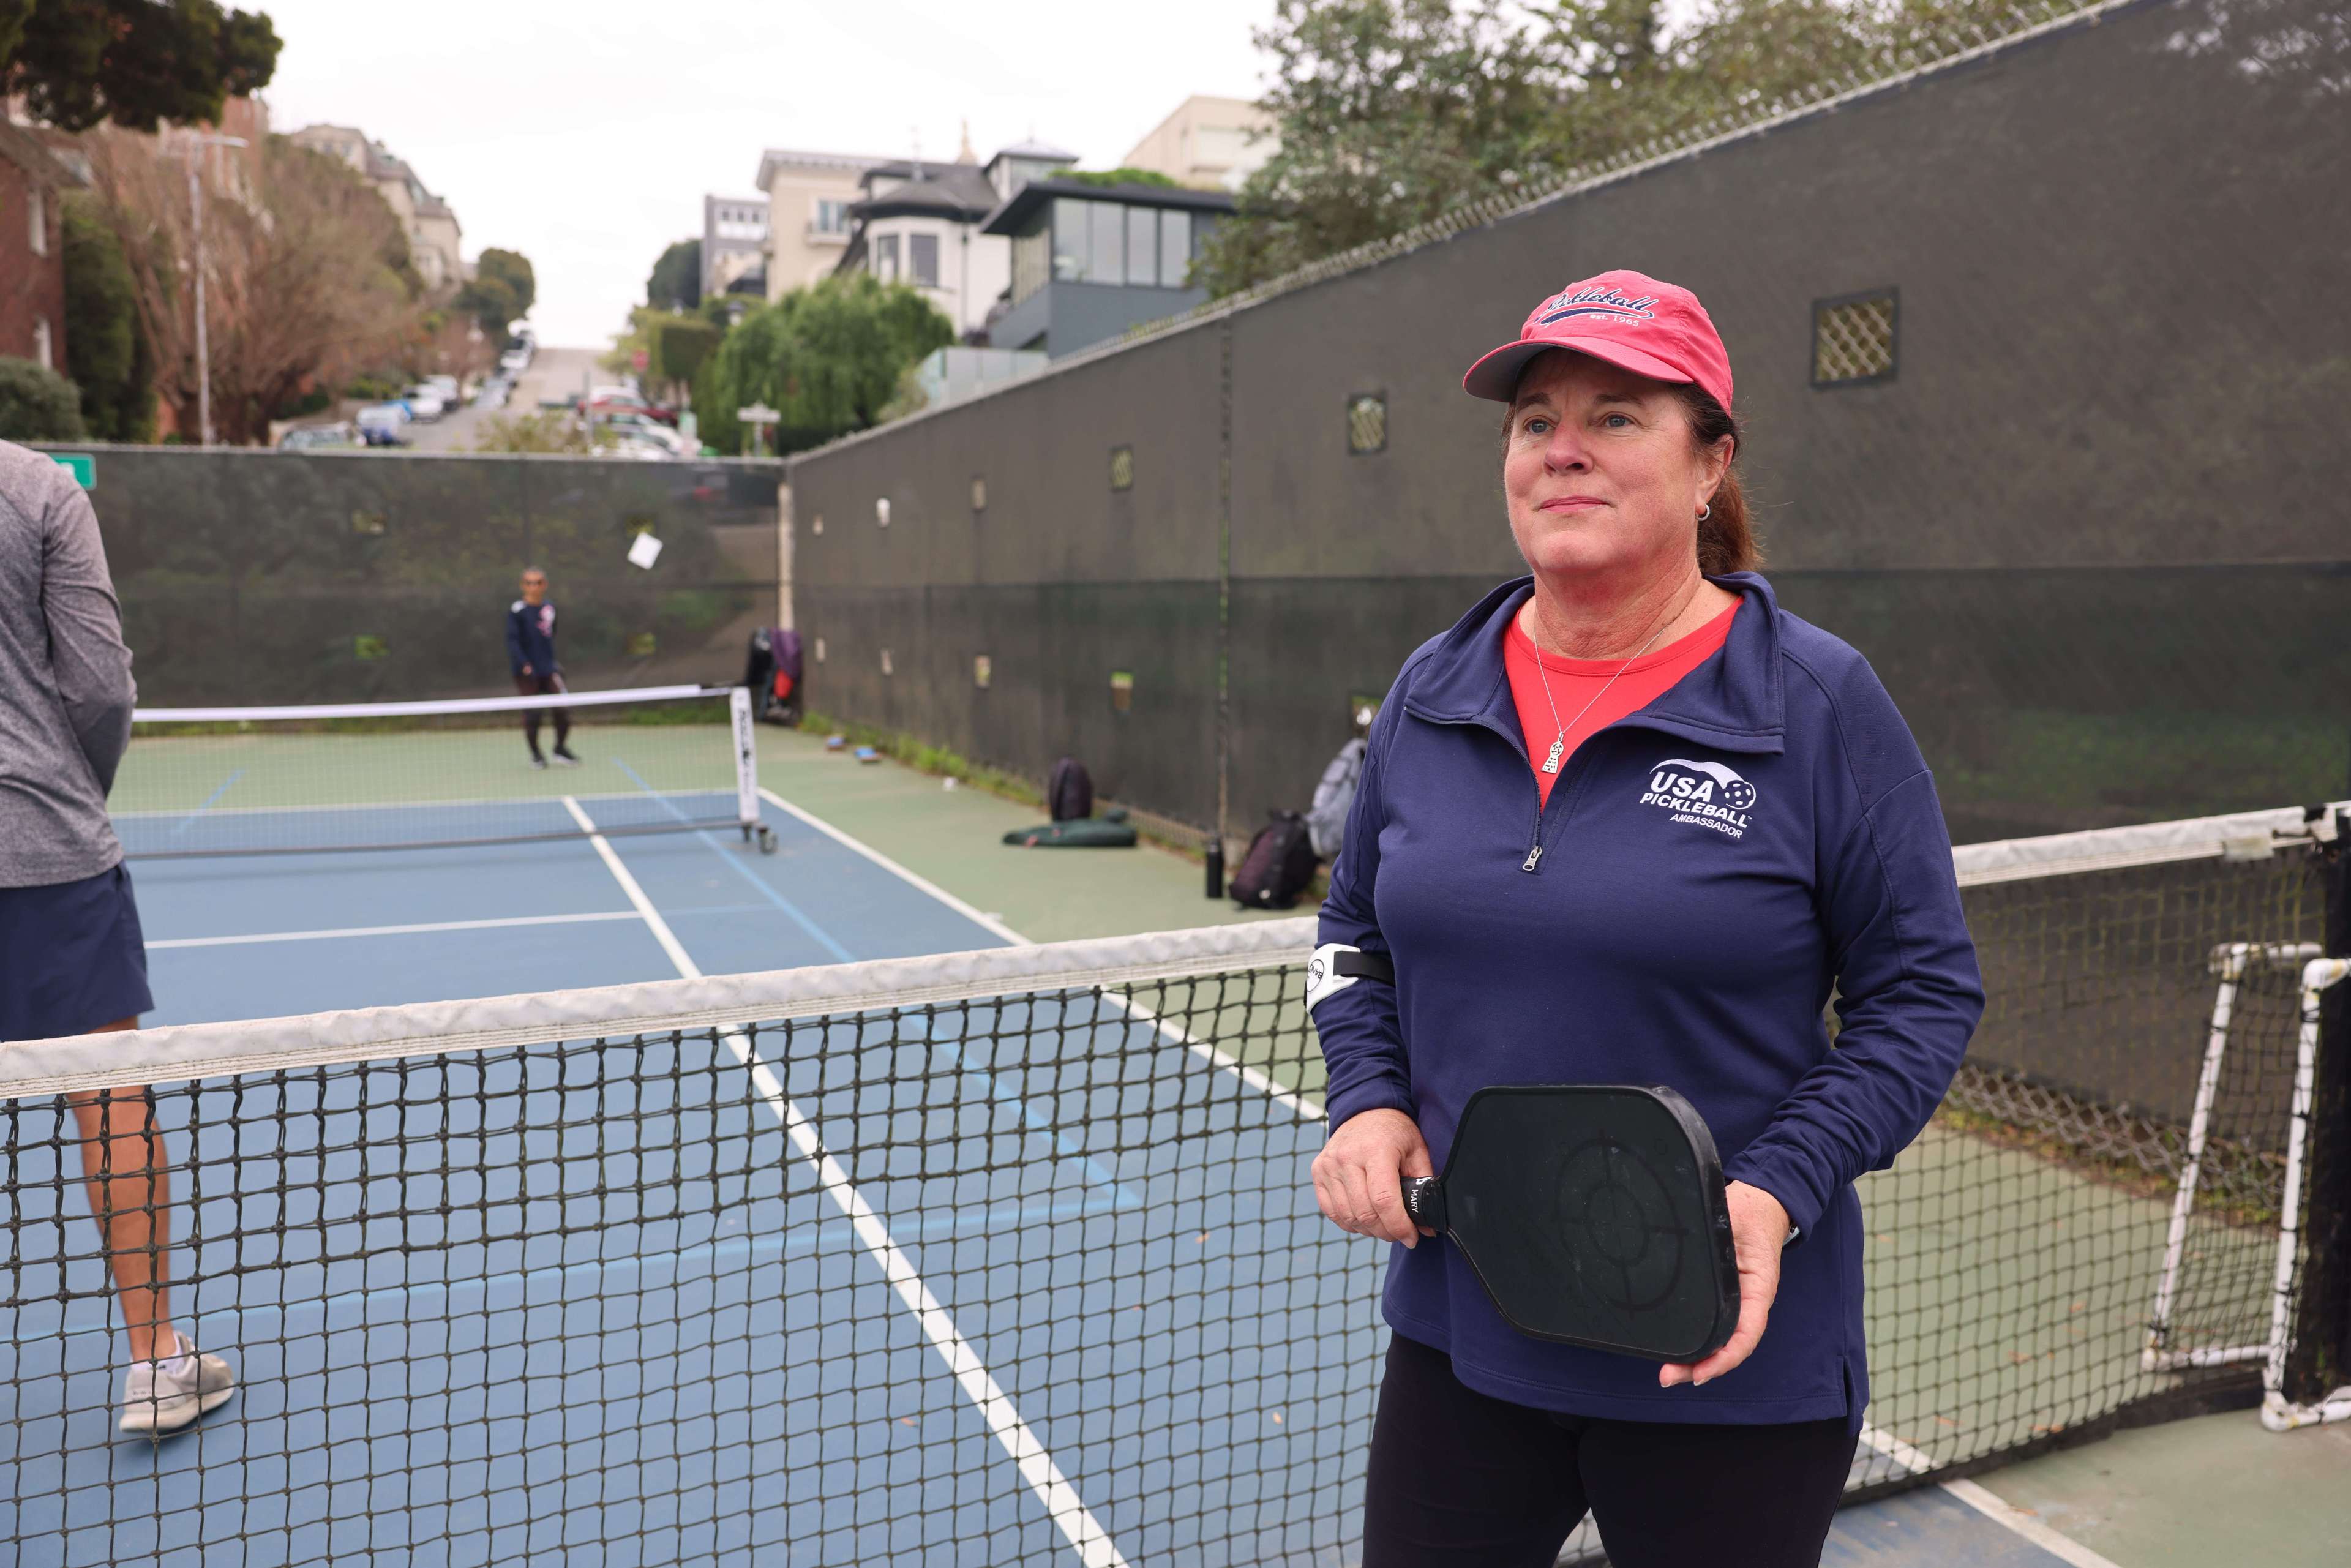 A woman stands by a pickleball net with a paddle, wearing a cap and sportswear, with players and courts in the background.